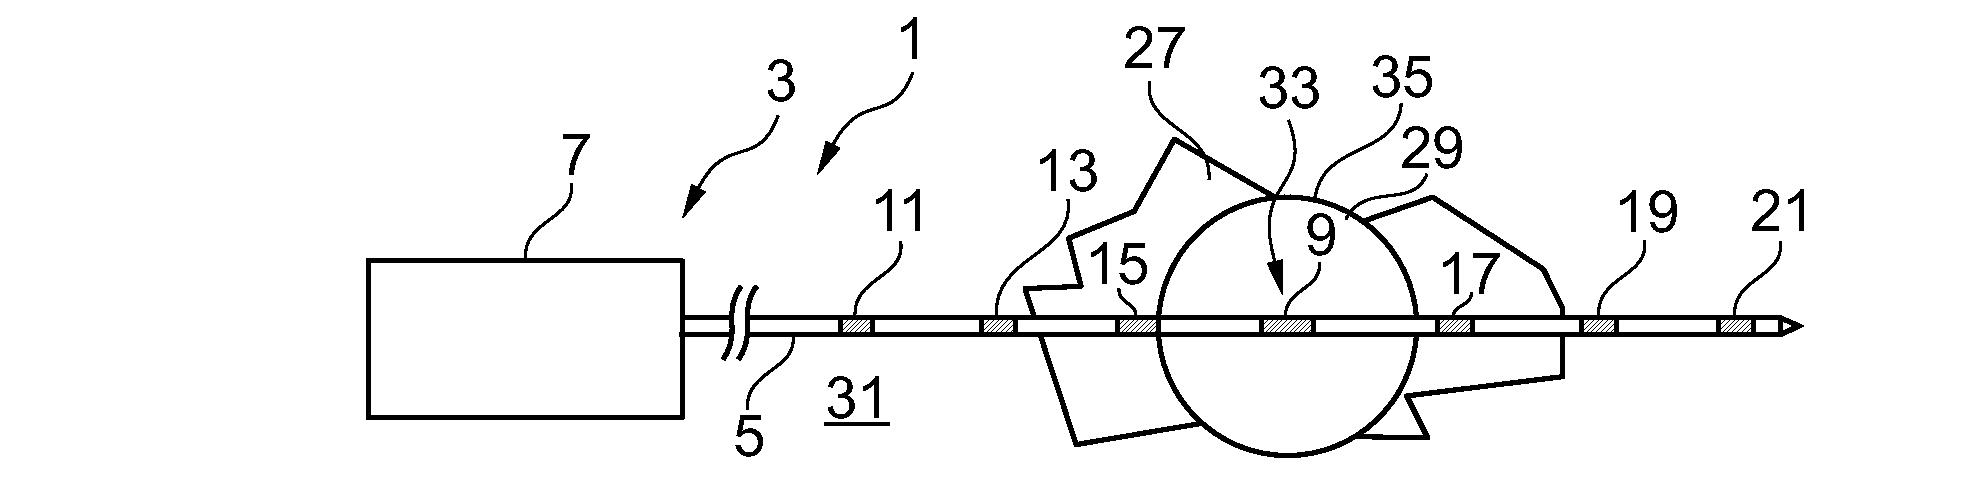 Interventional ablation device with tissue discriminating capability